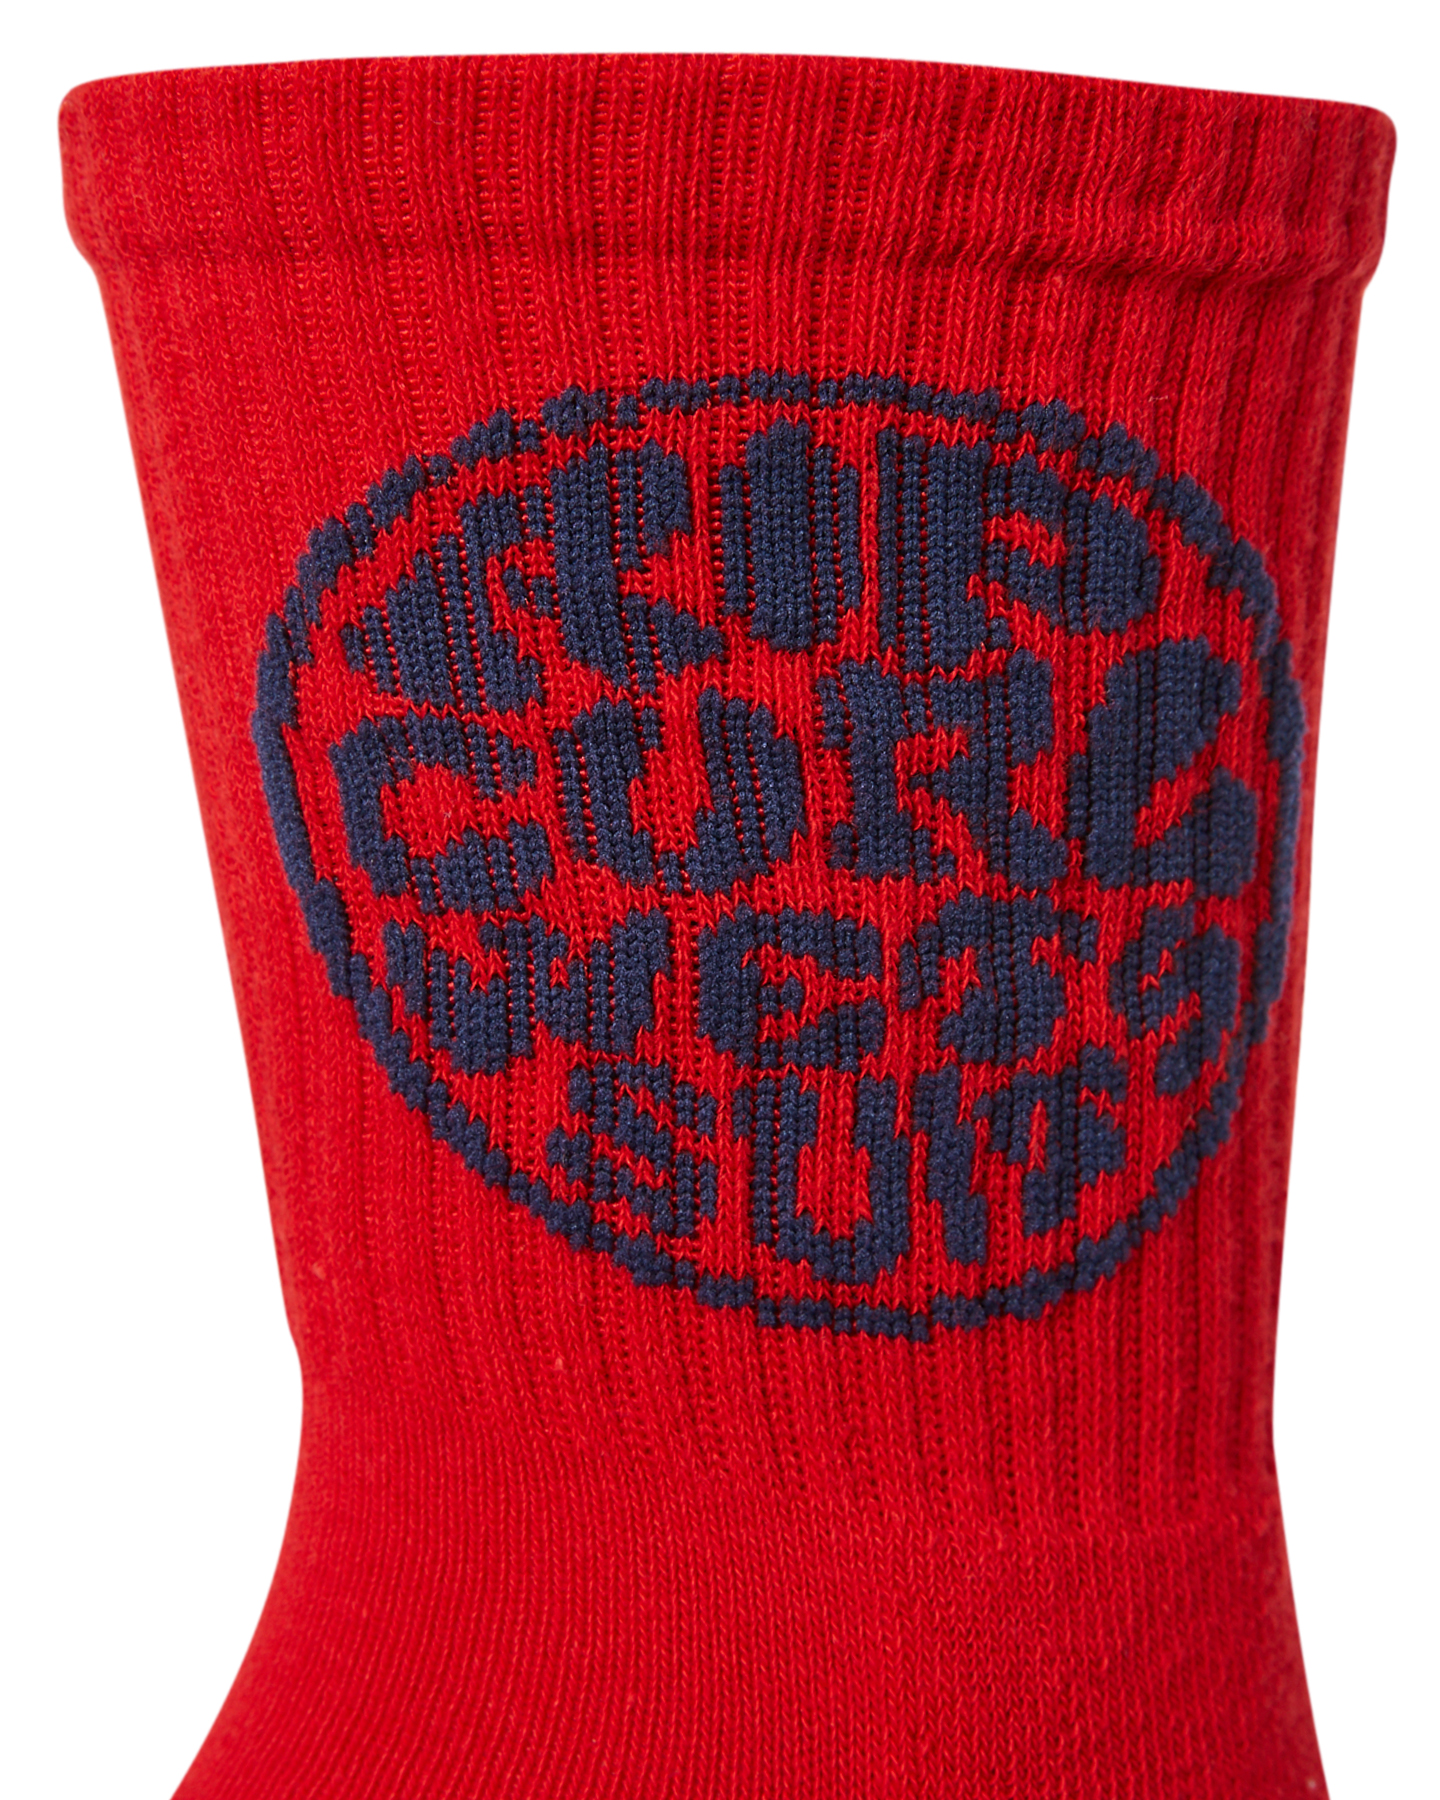 Rip Curl Wetty Crew Sock 5 Pack - Bright | SurfStitch